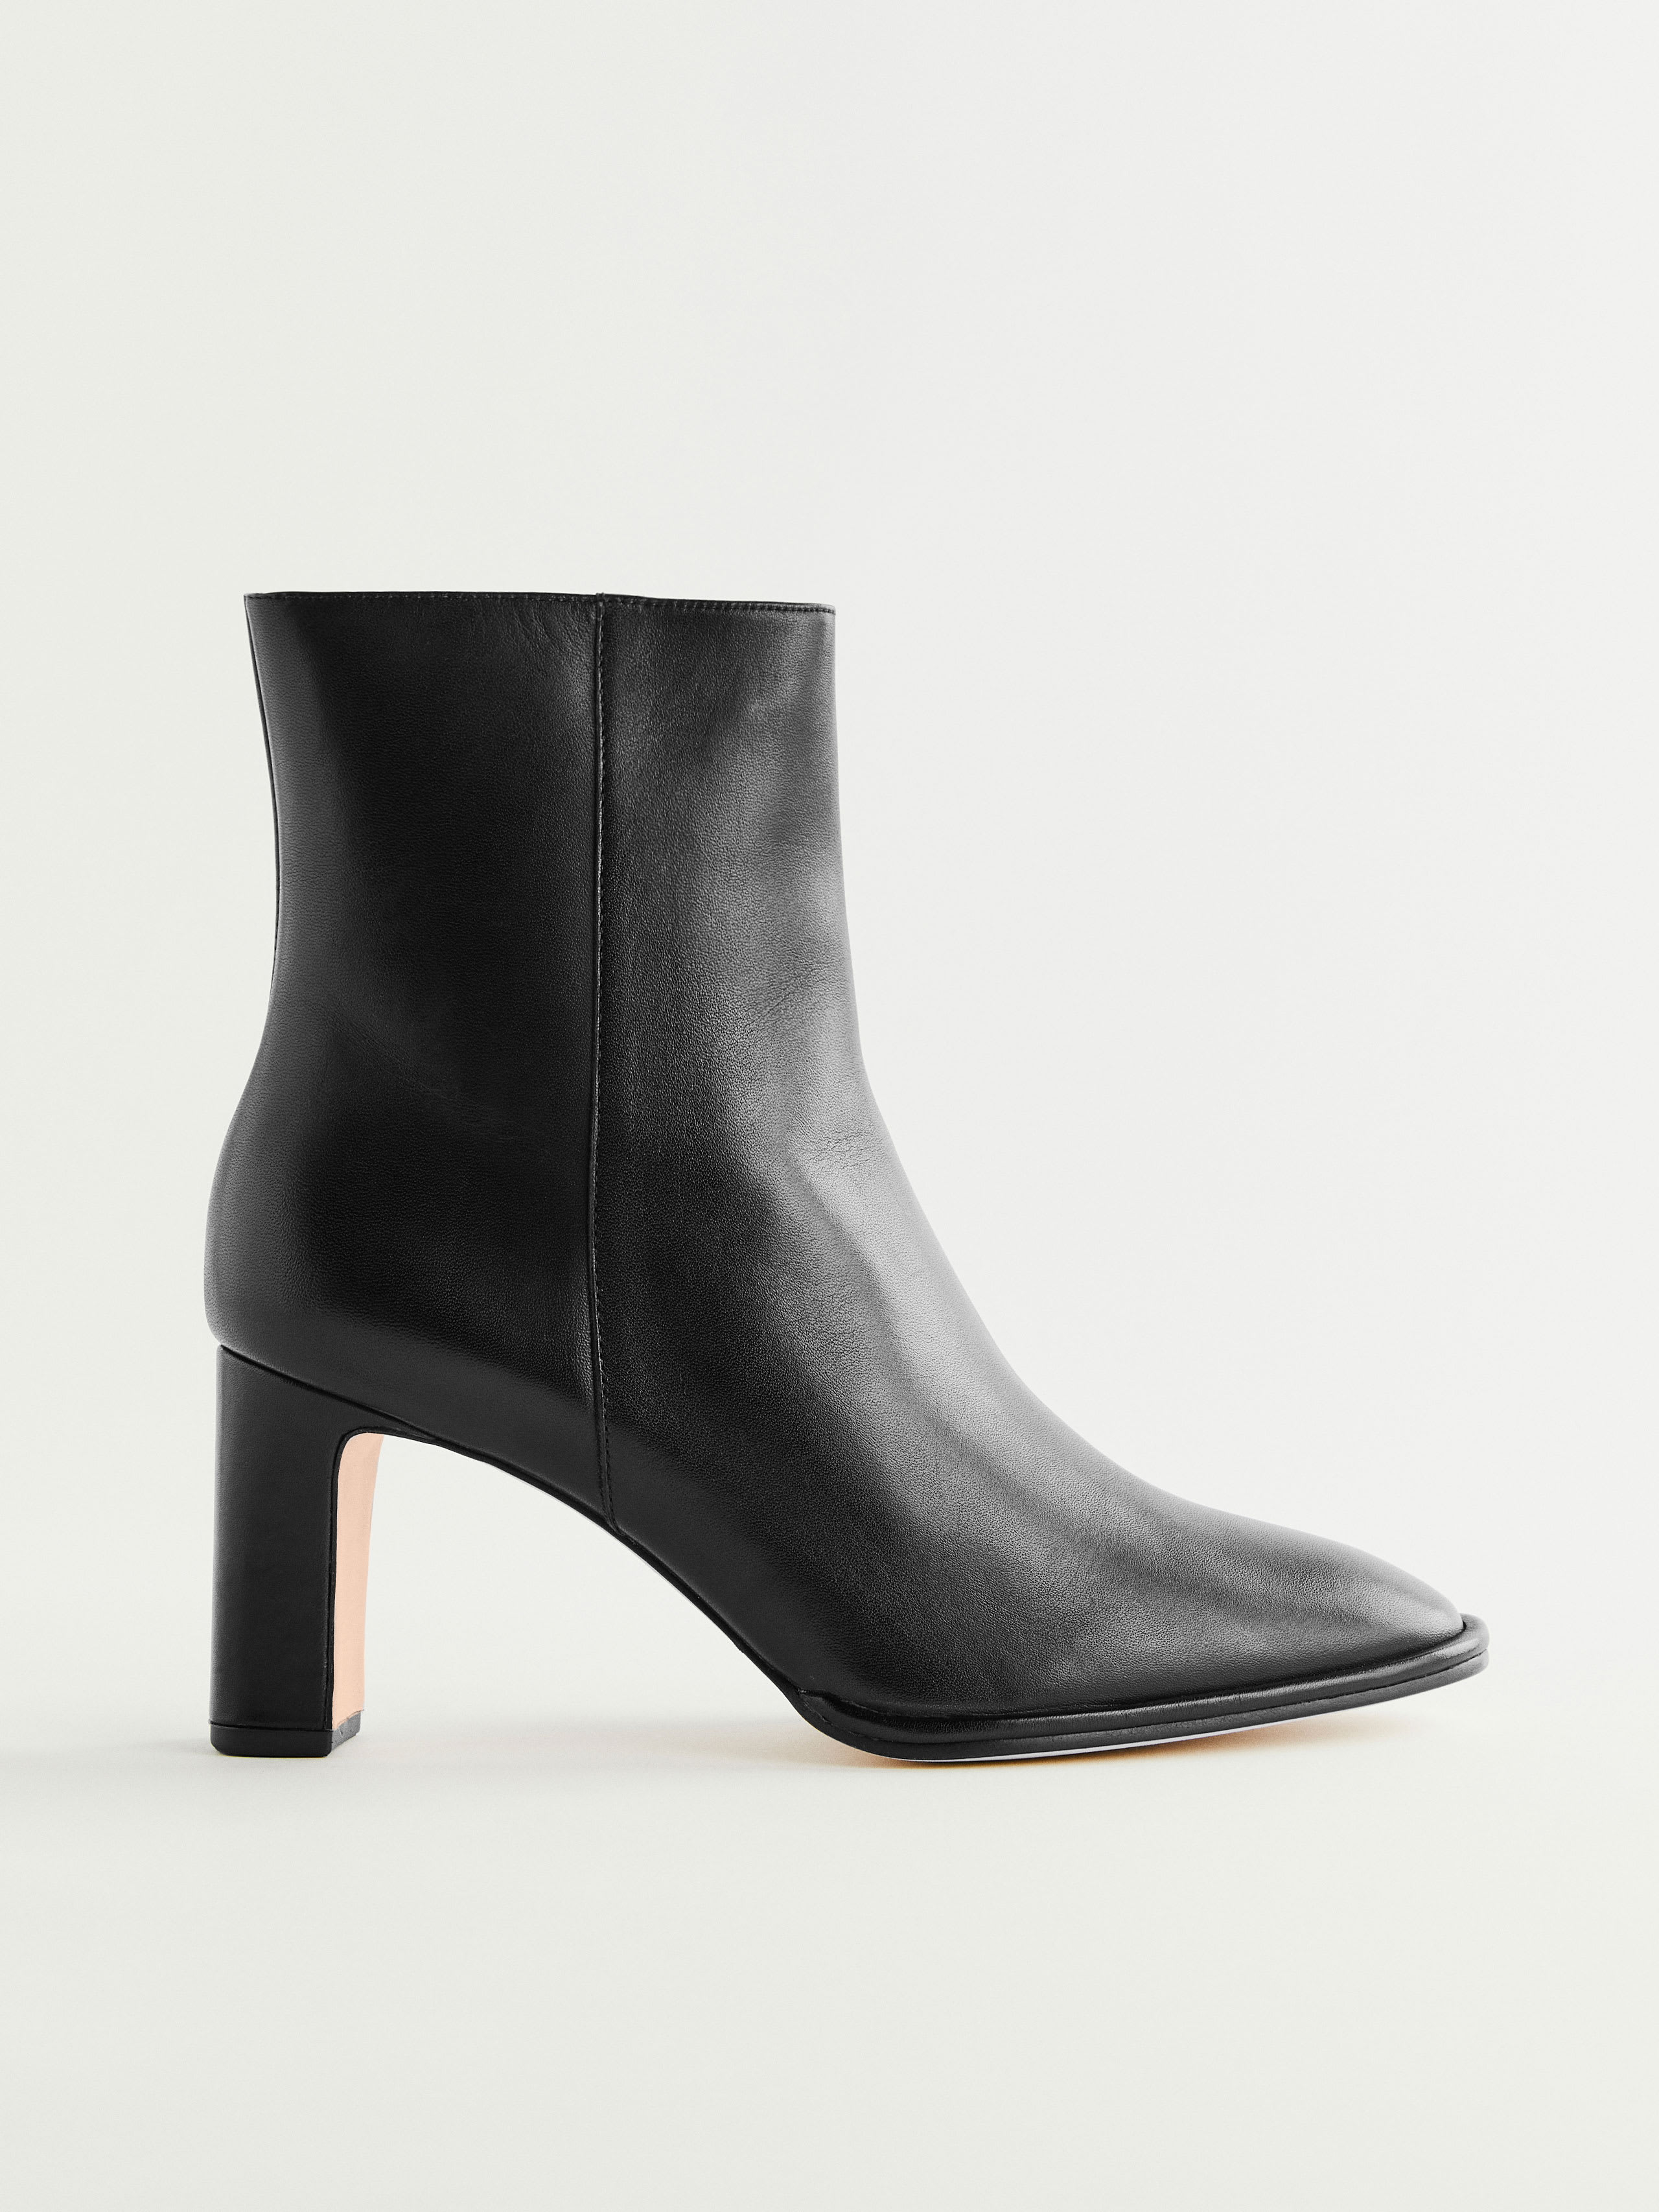 Reformation Gillian Ankle Boot In Black Leather